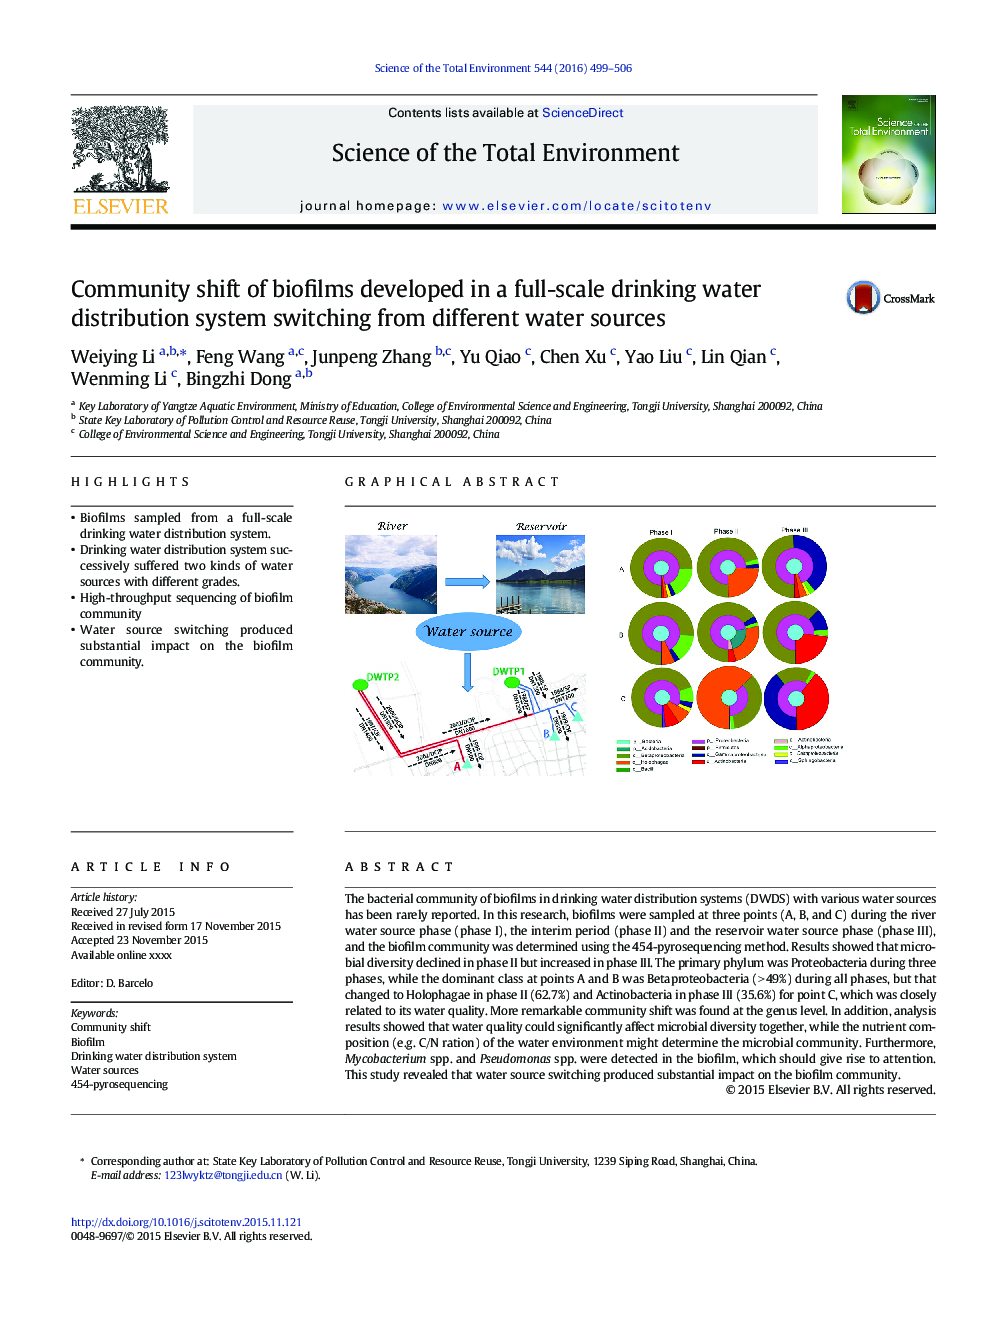 Community shift of biofilms developed in a full-scale drinking water distribution system switching from different water sources